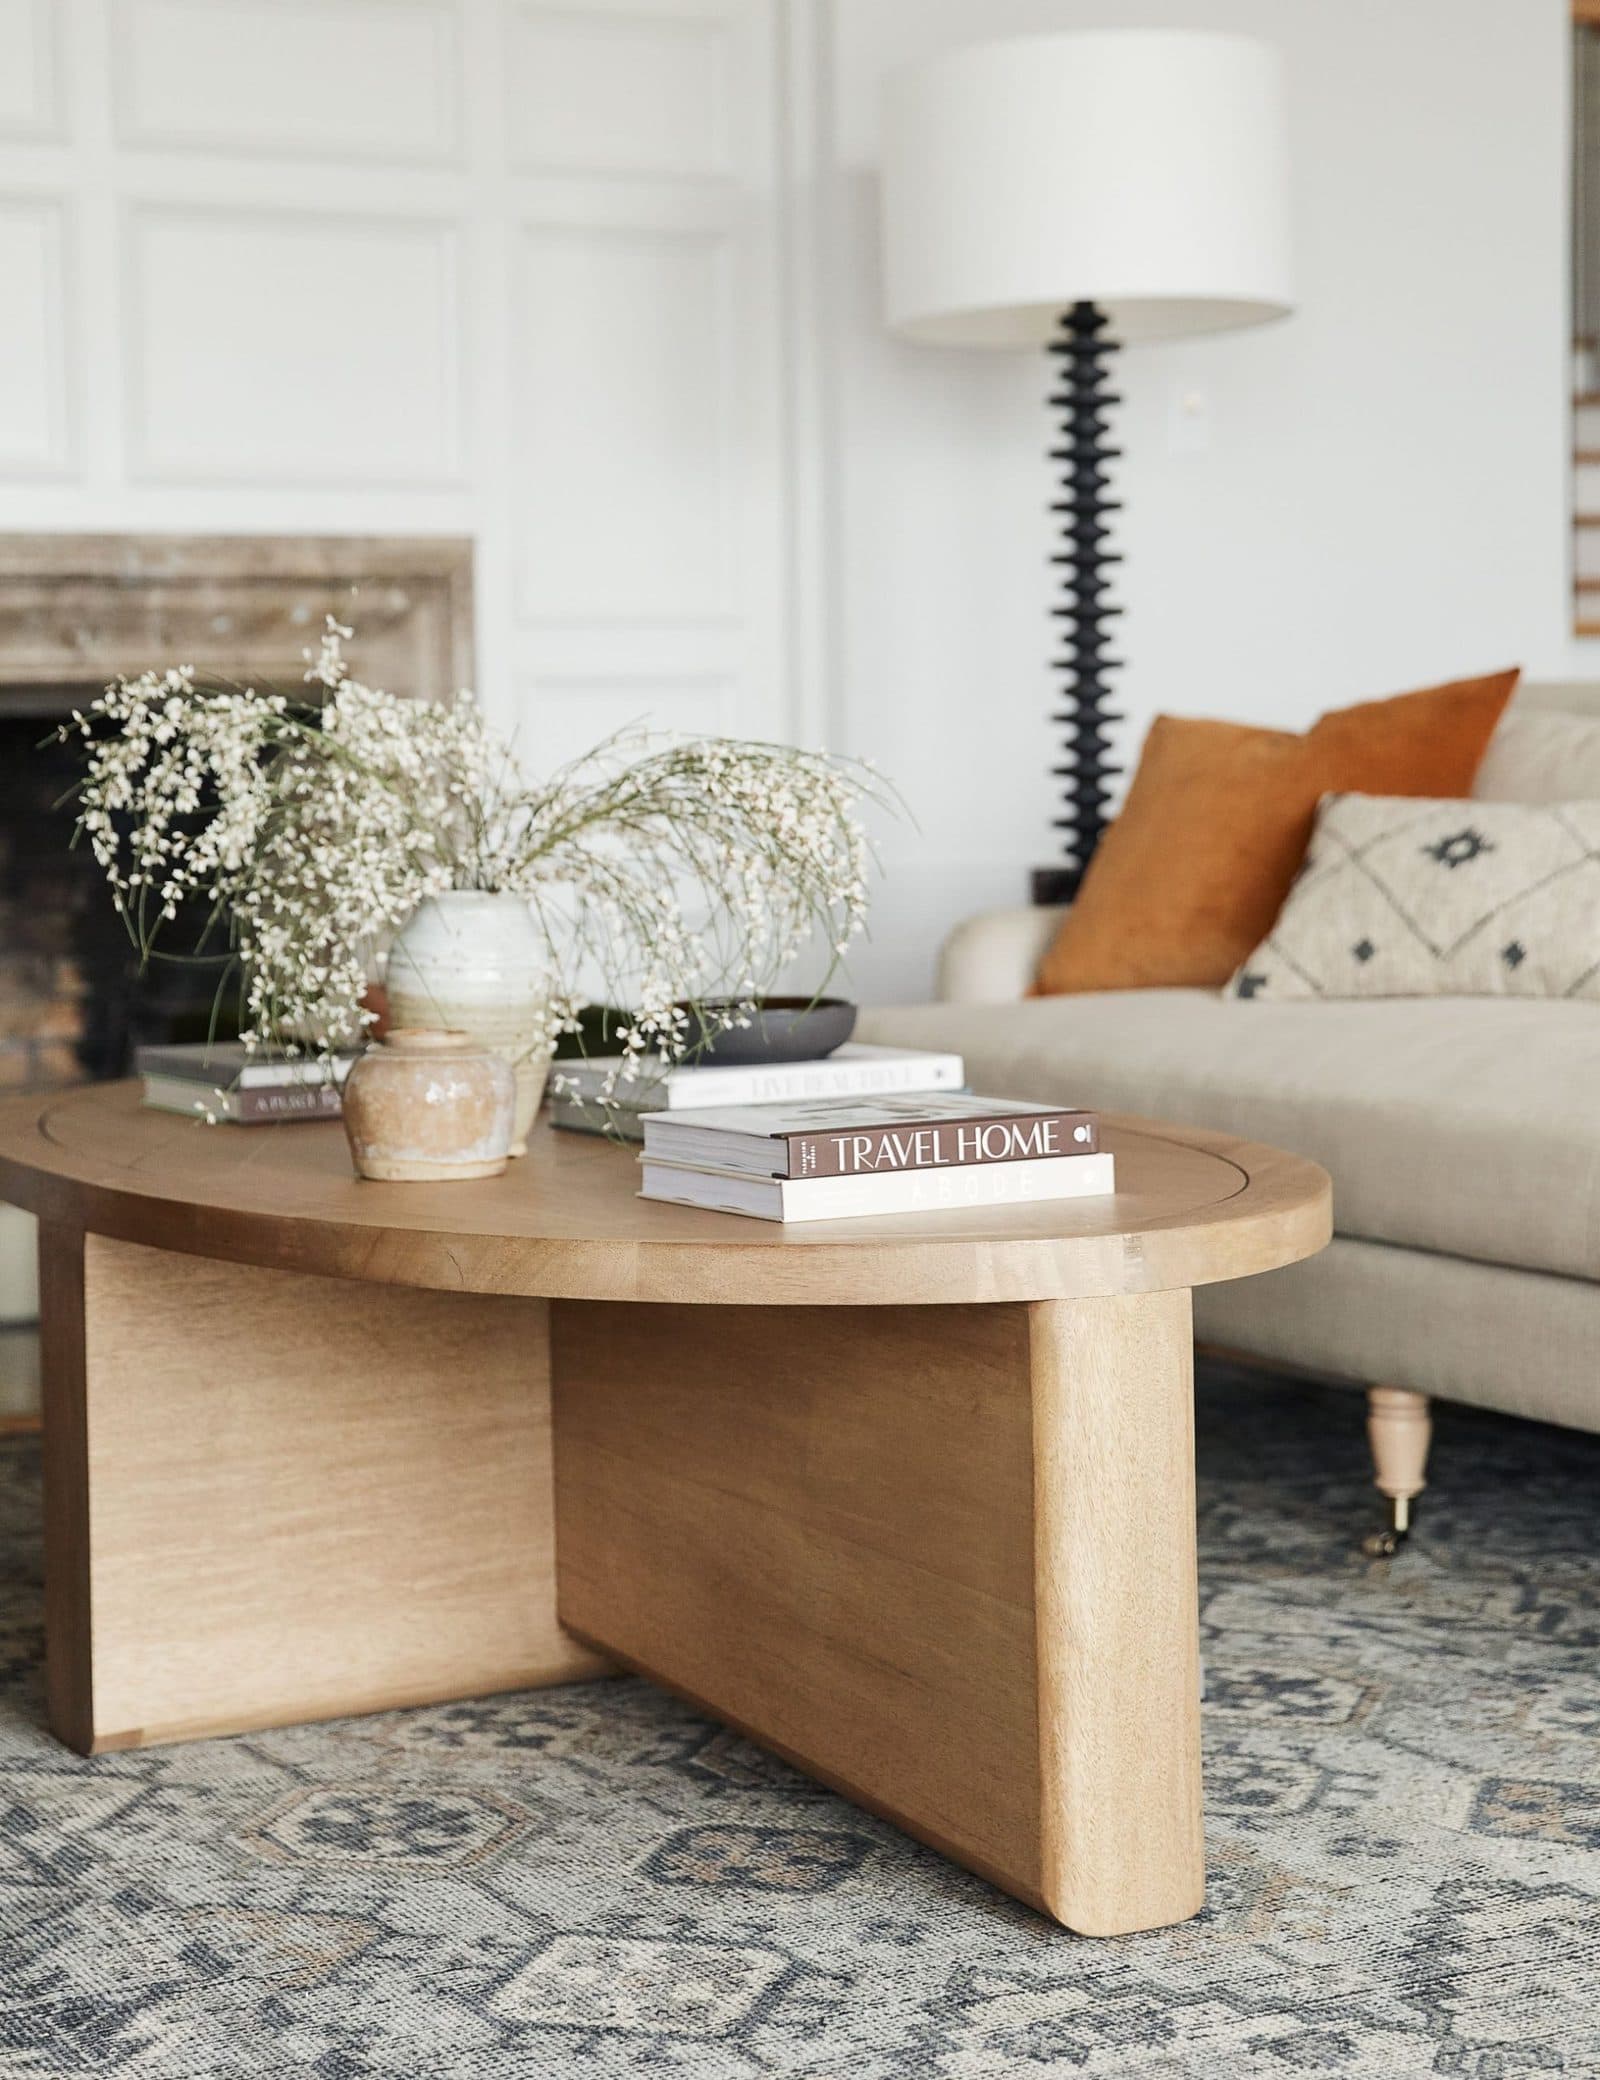 Opt for a Wood Coffee Table